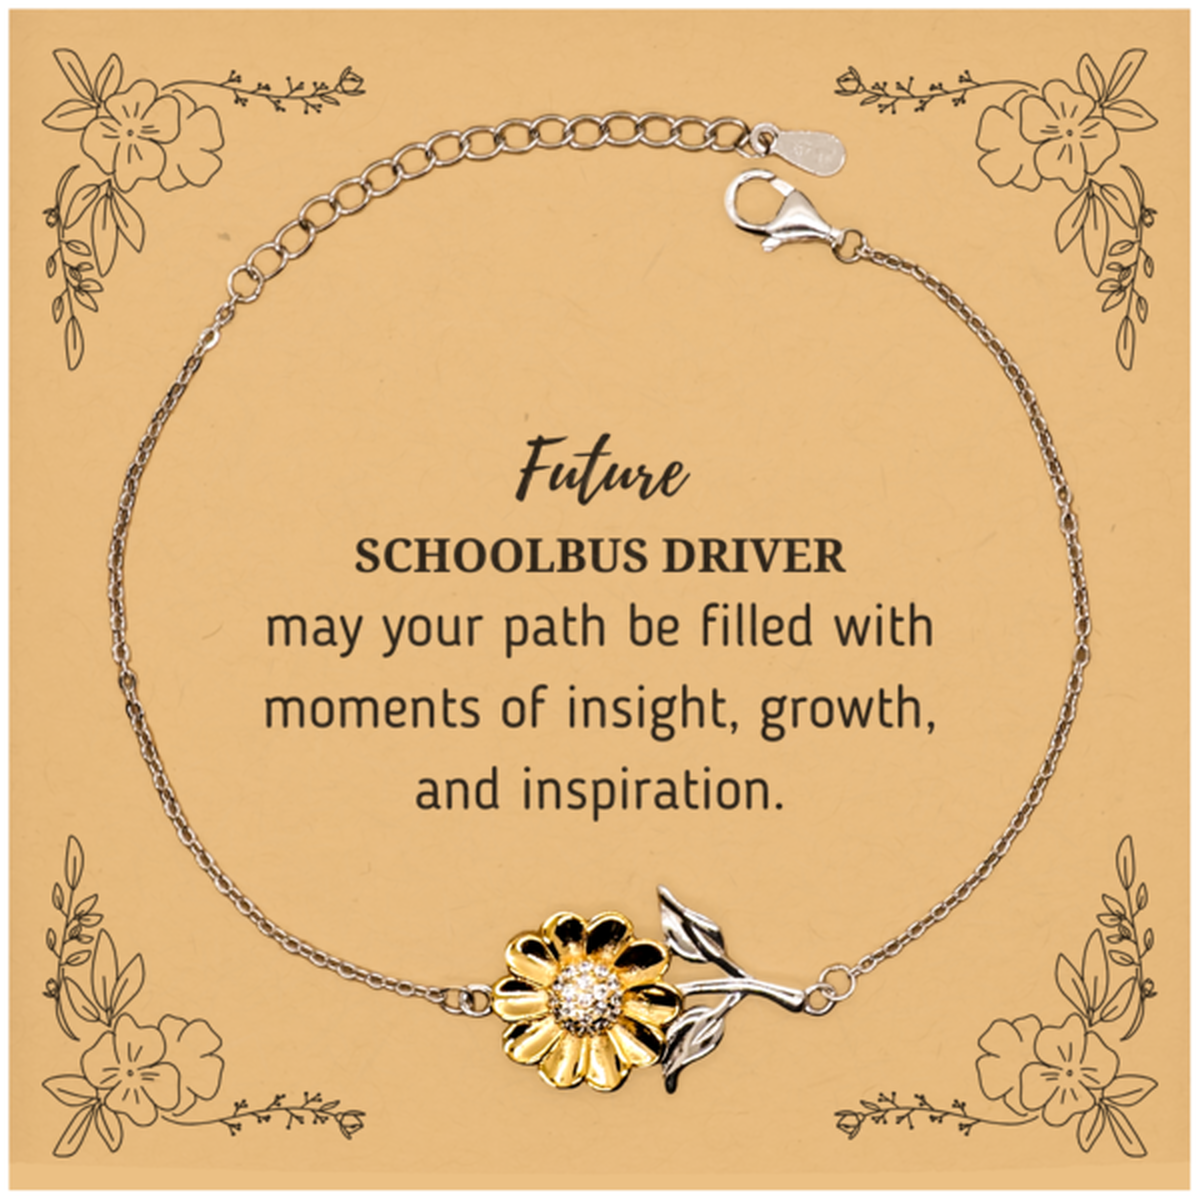 Future Schoolbus Driver Gifts, May your path be filled with moments of insight, Graduation Gifts for New Schoolbus Driver, Christmas Unique Sunflower Bracelet For Men, Women, Friends